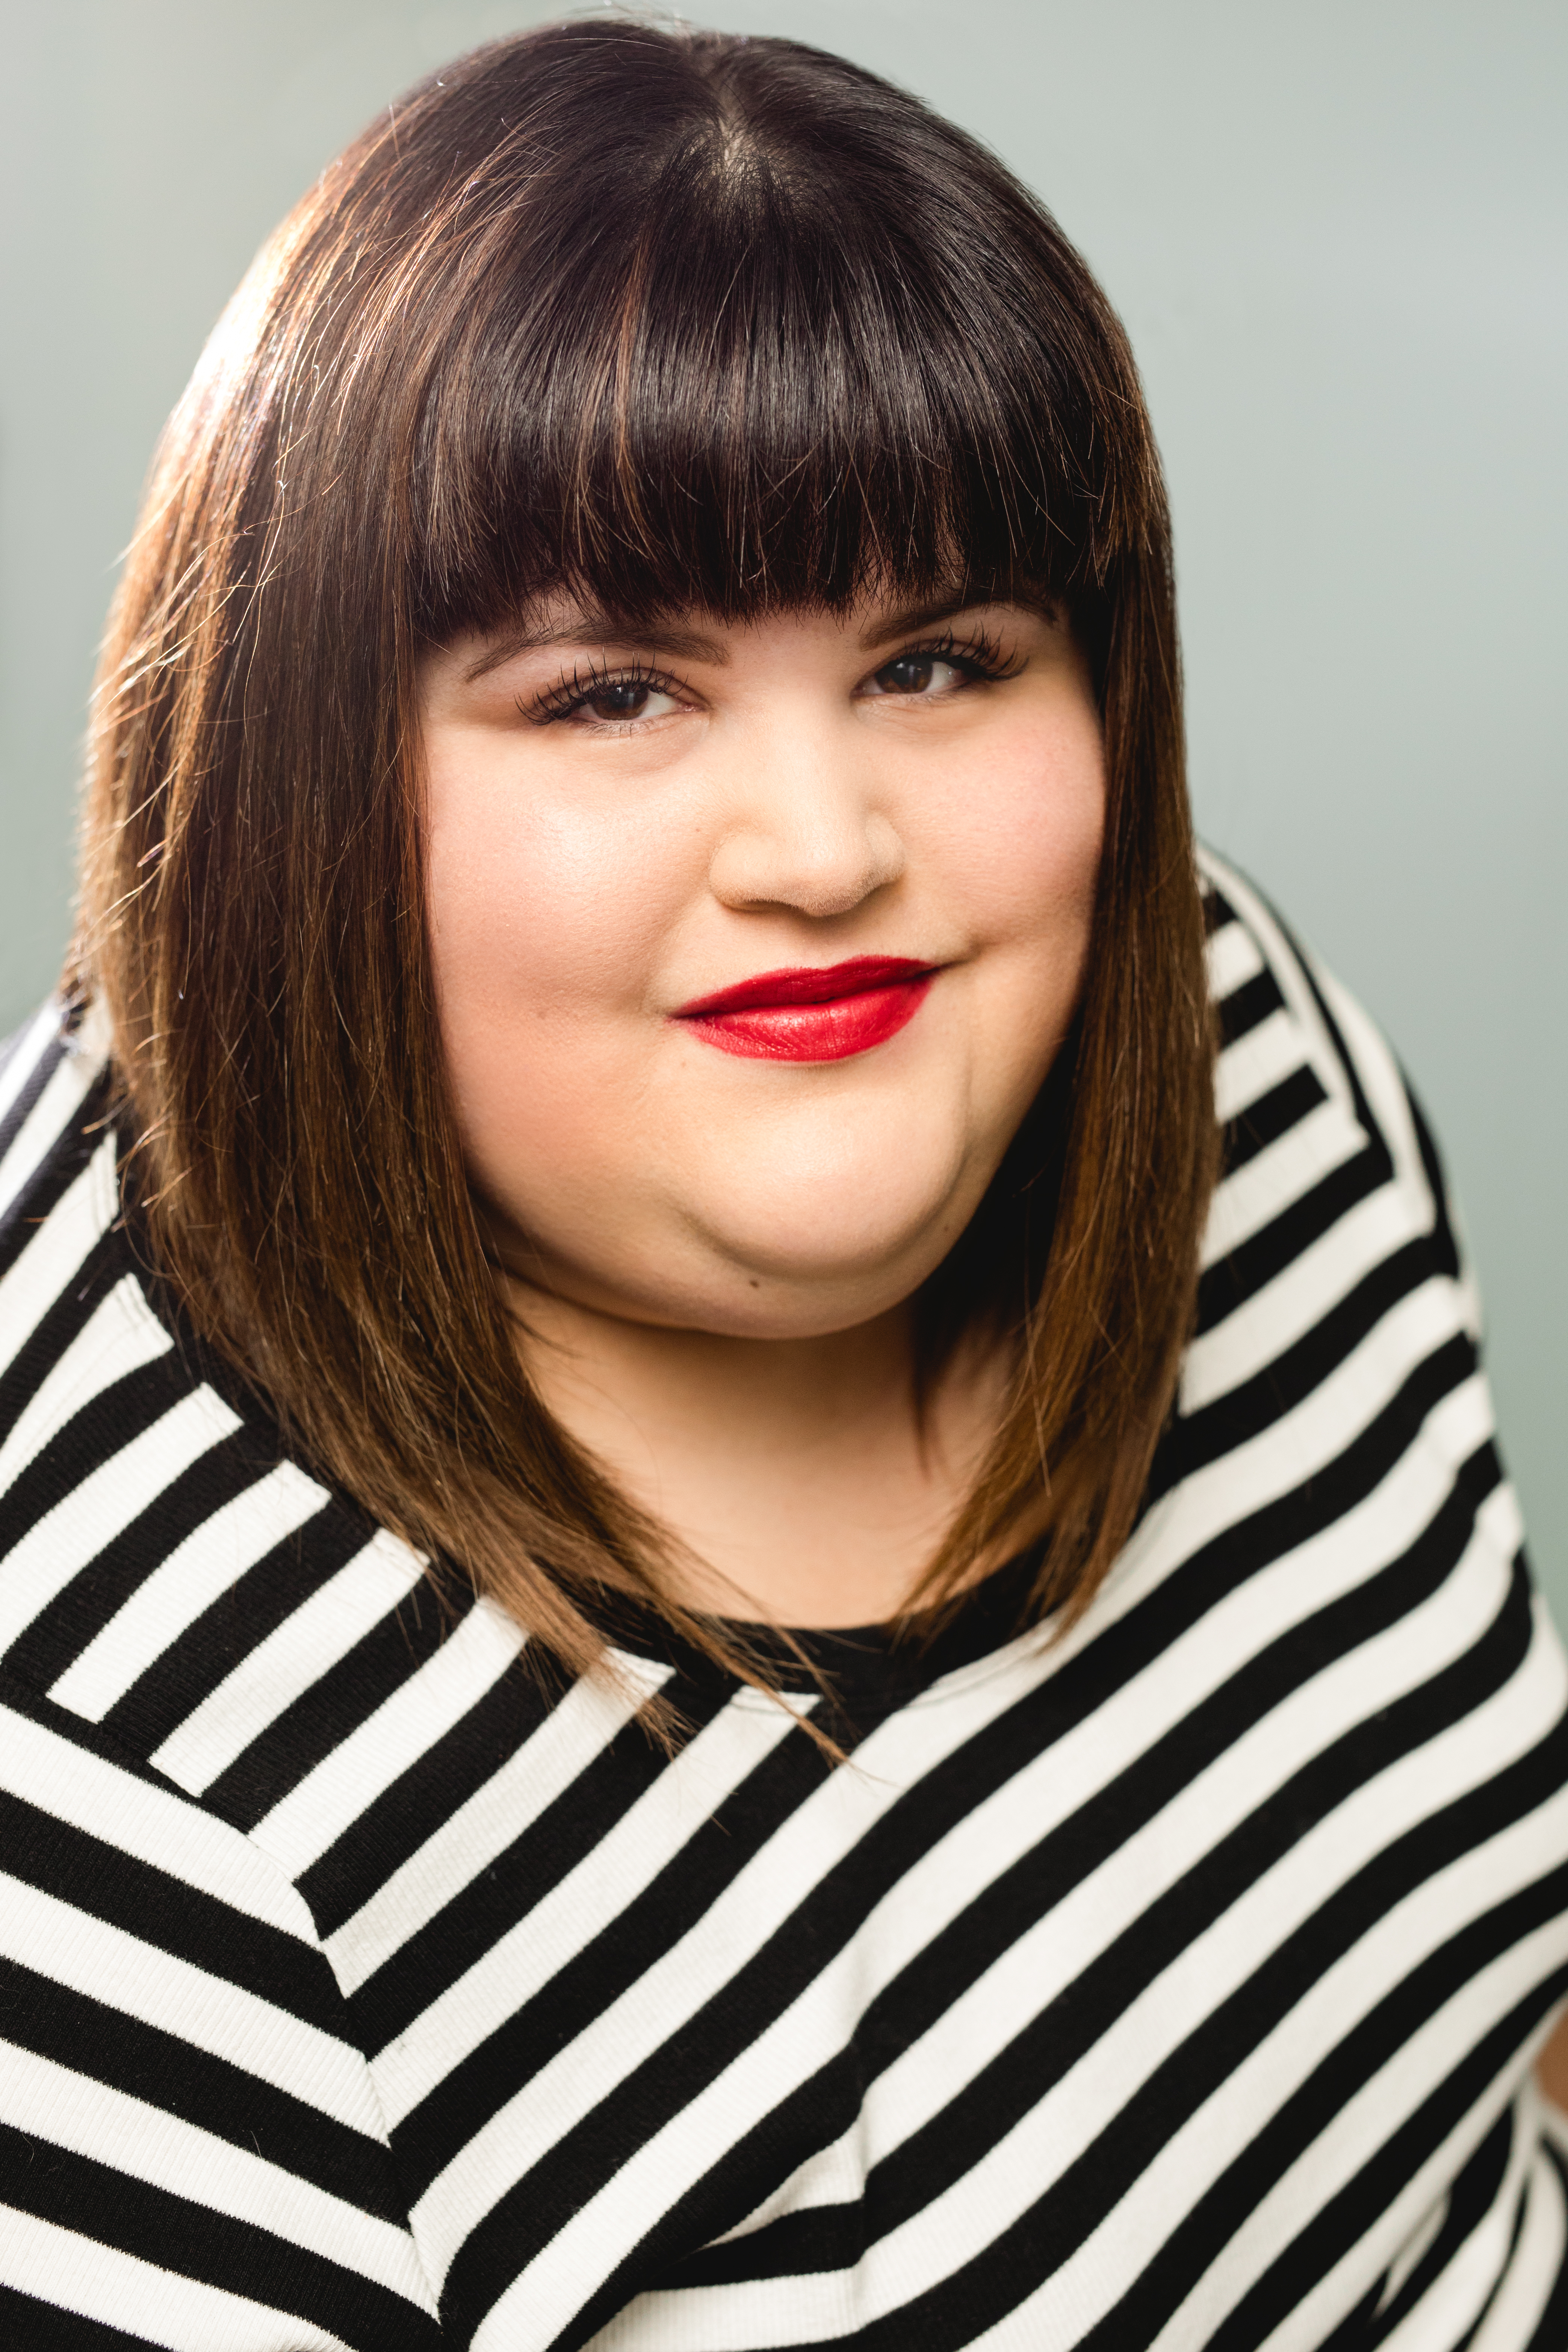 Julie Murphy smiling wearing red lipstick and a black and white striped shirt.